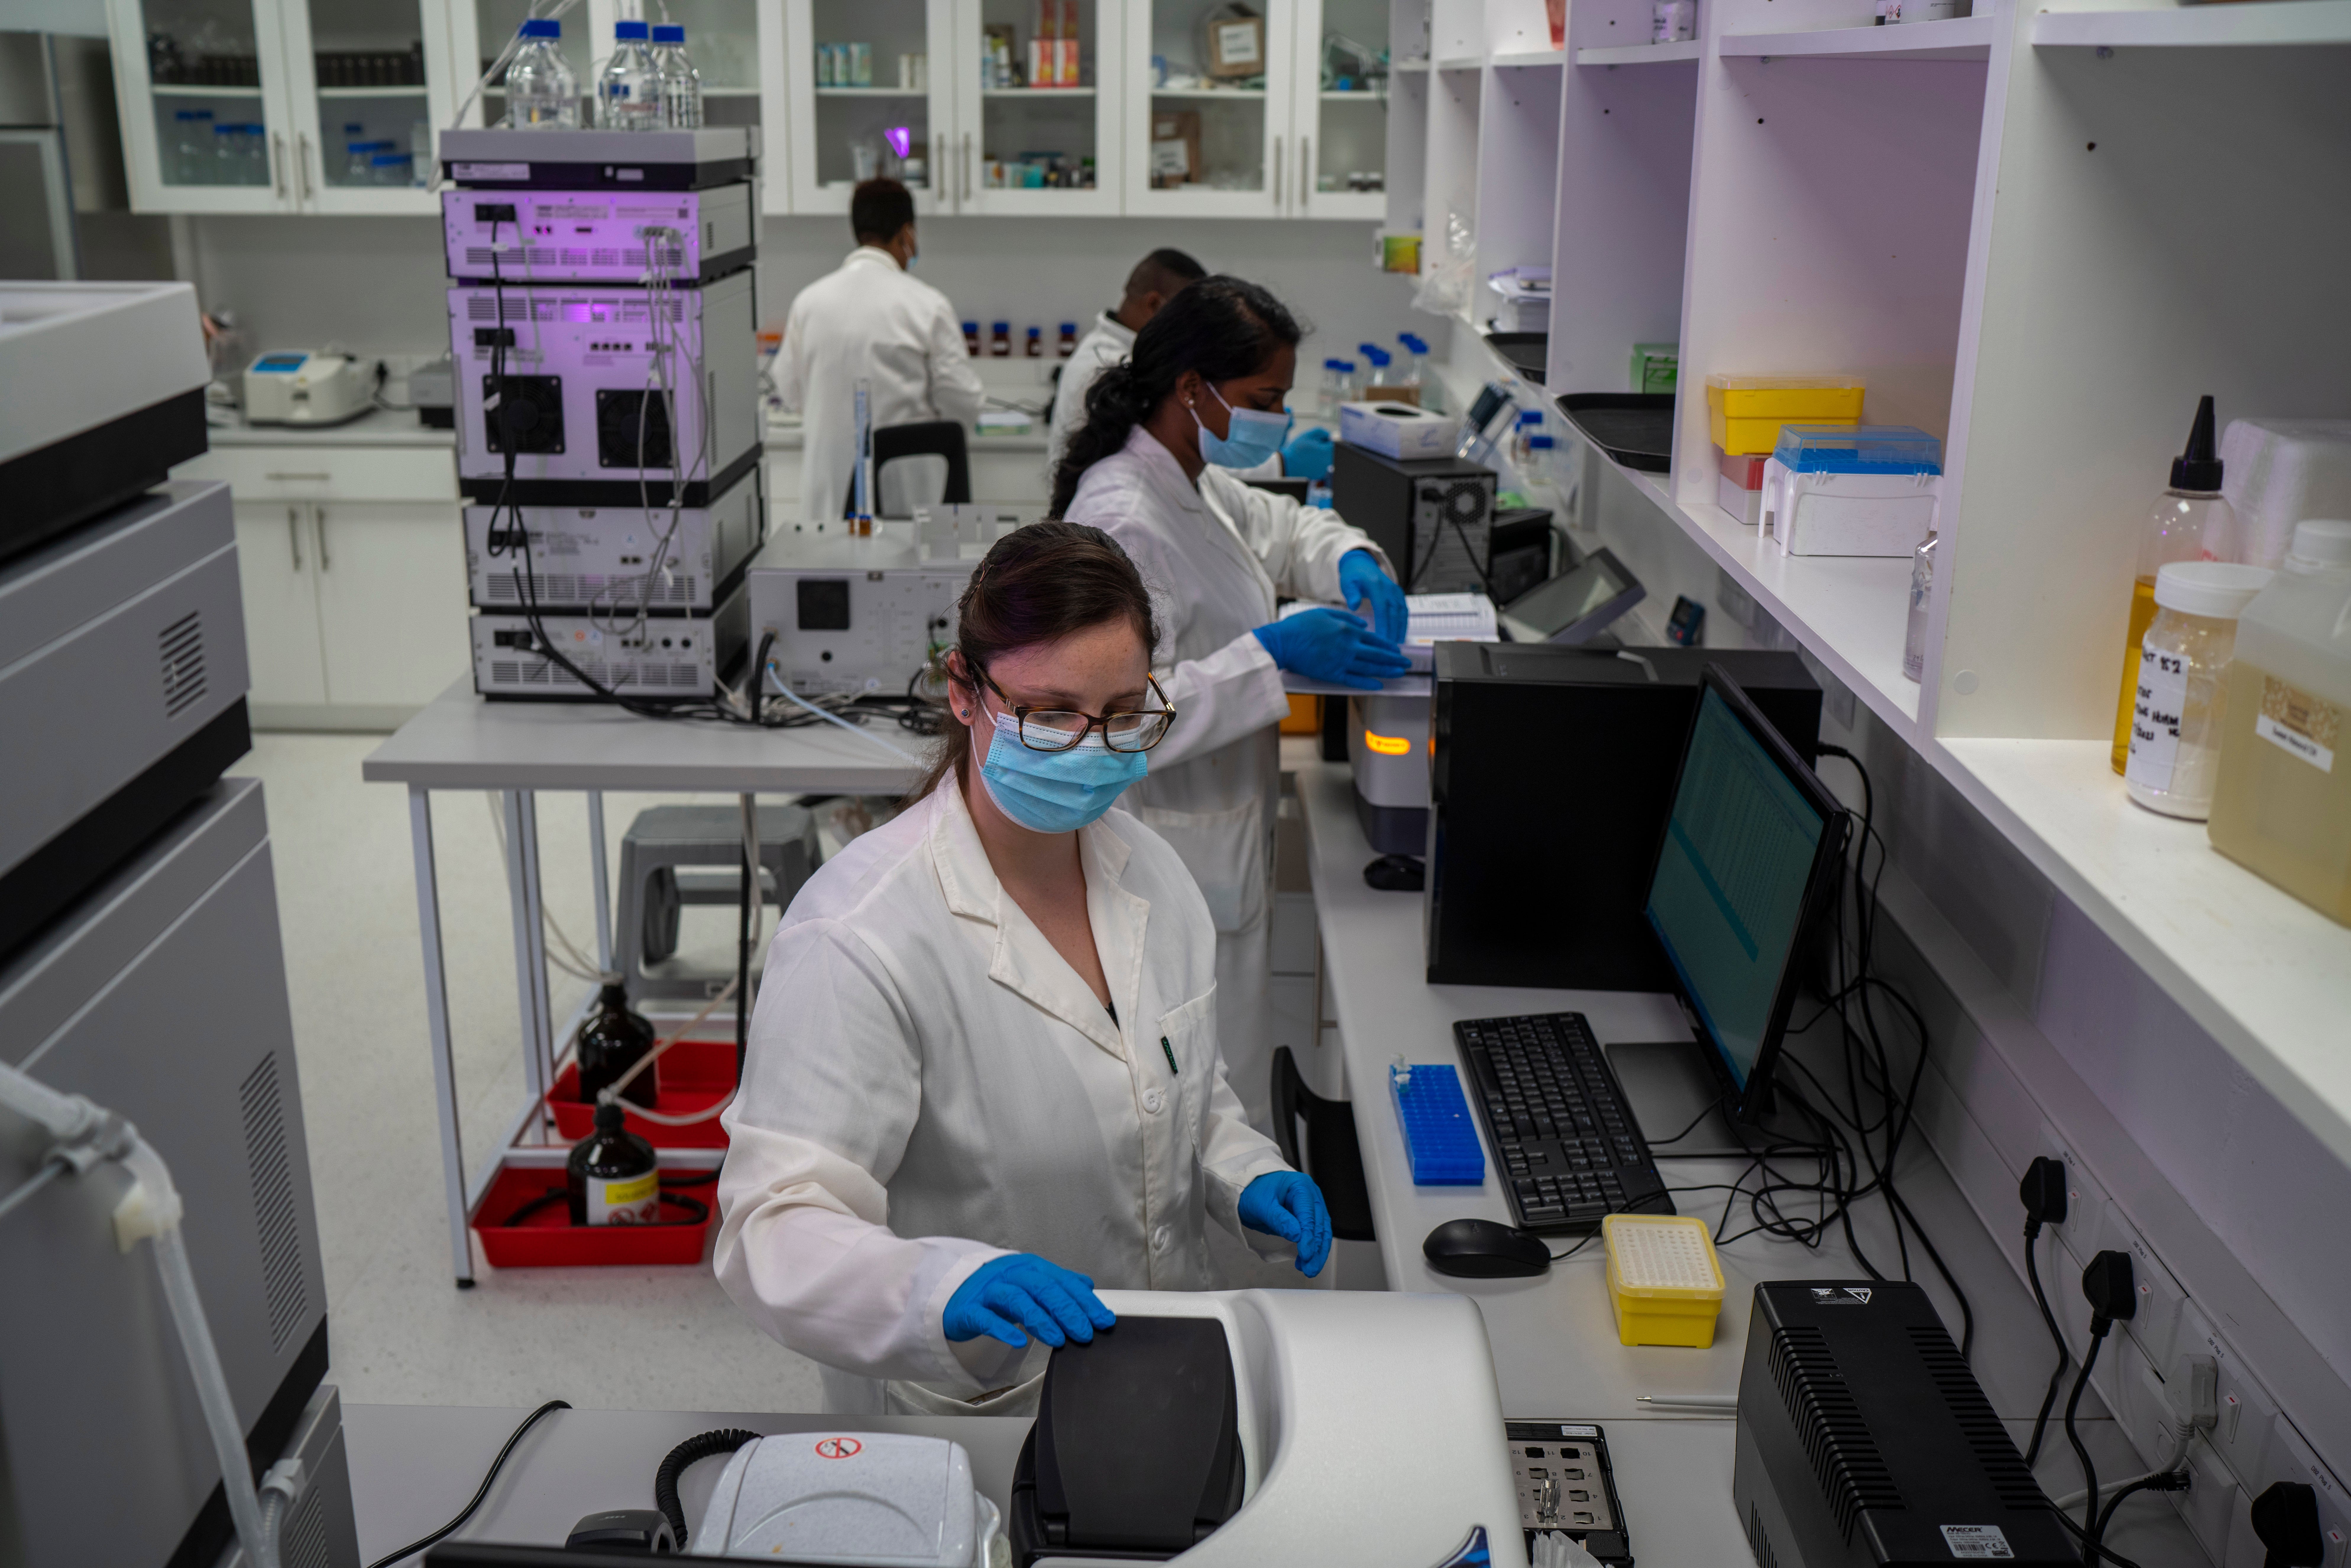 Scientists conduct reserach at an Afrigen Biologics and Vaccines facility in Cape Town, South Africa